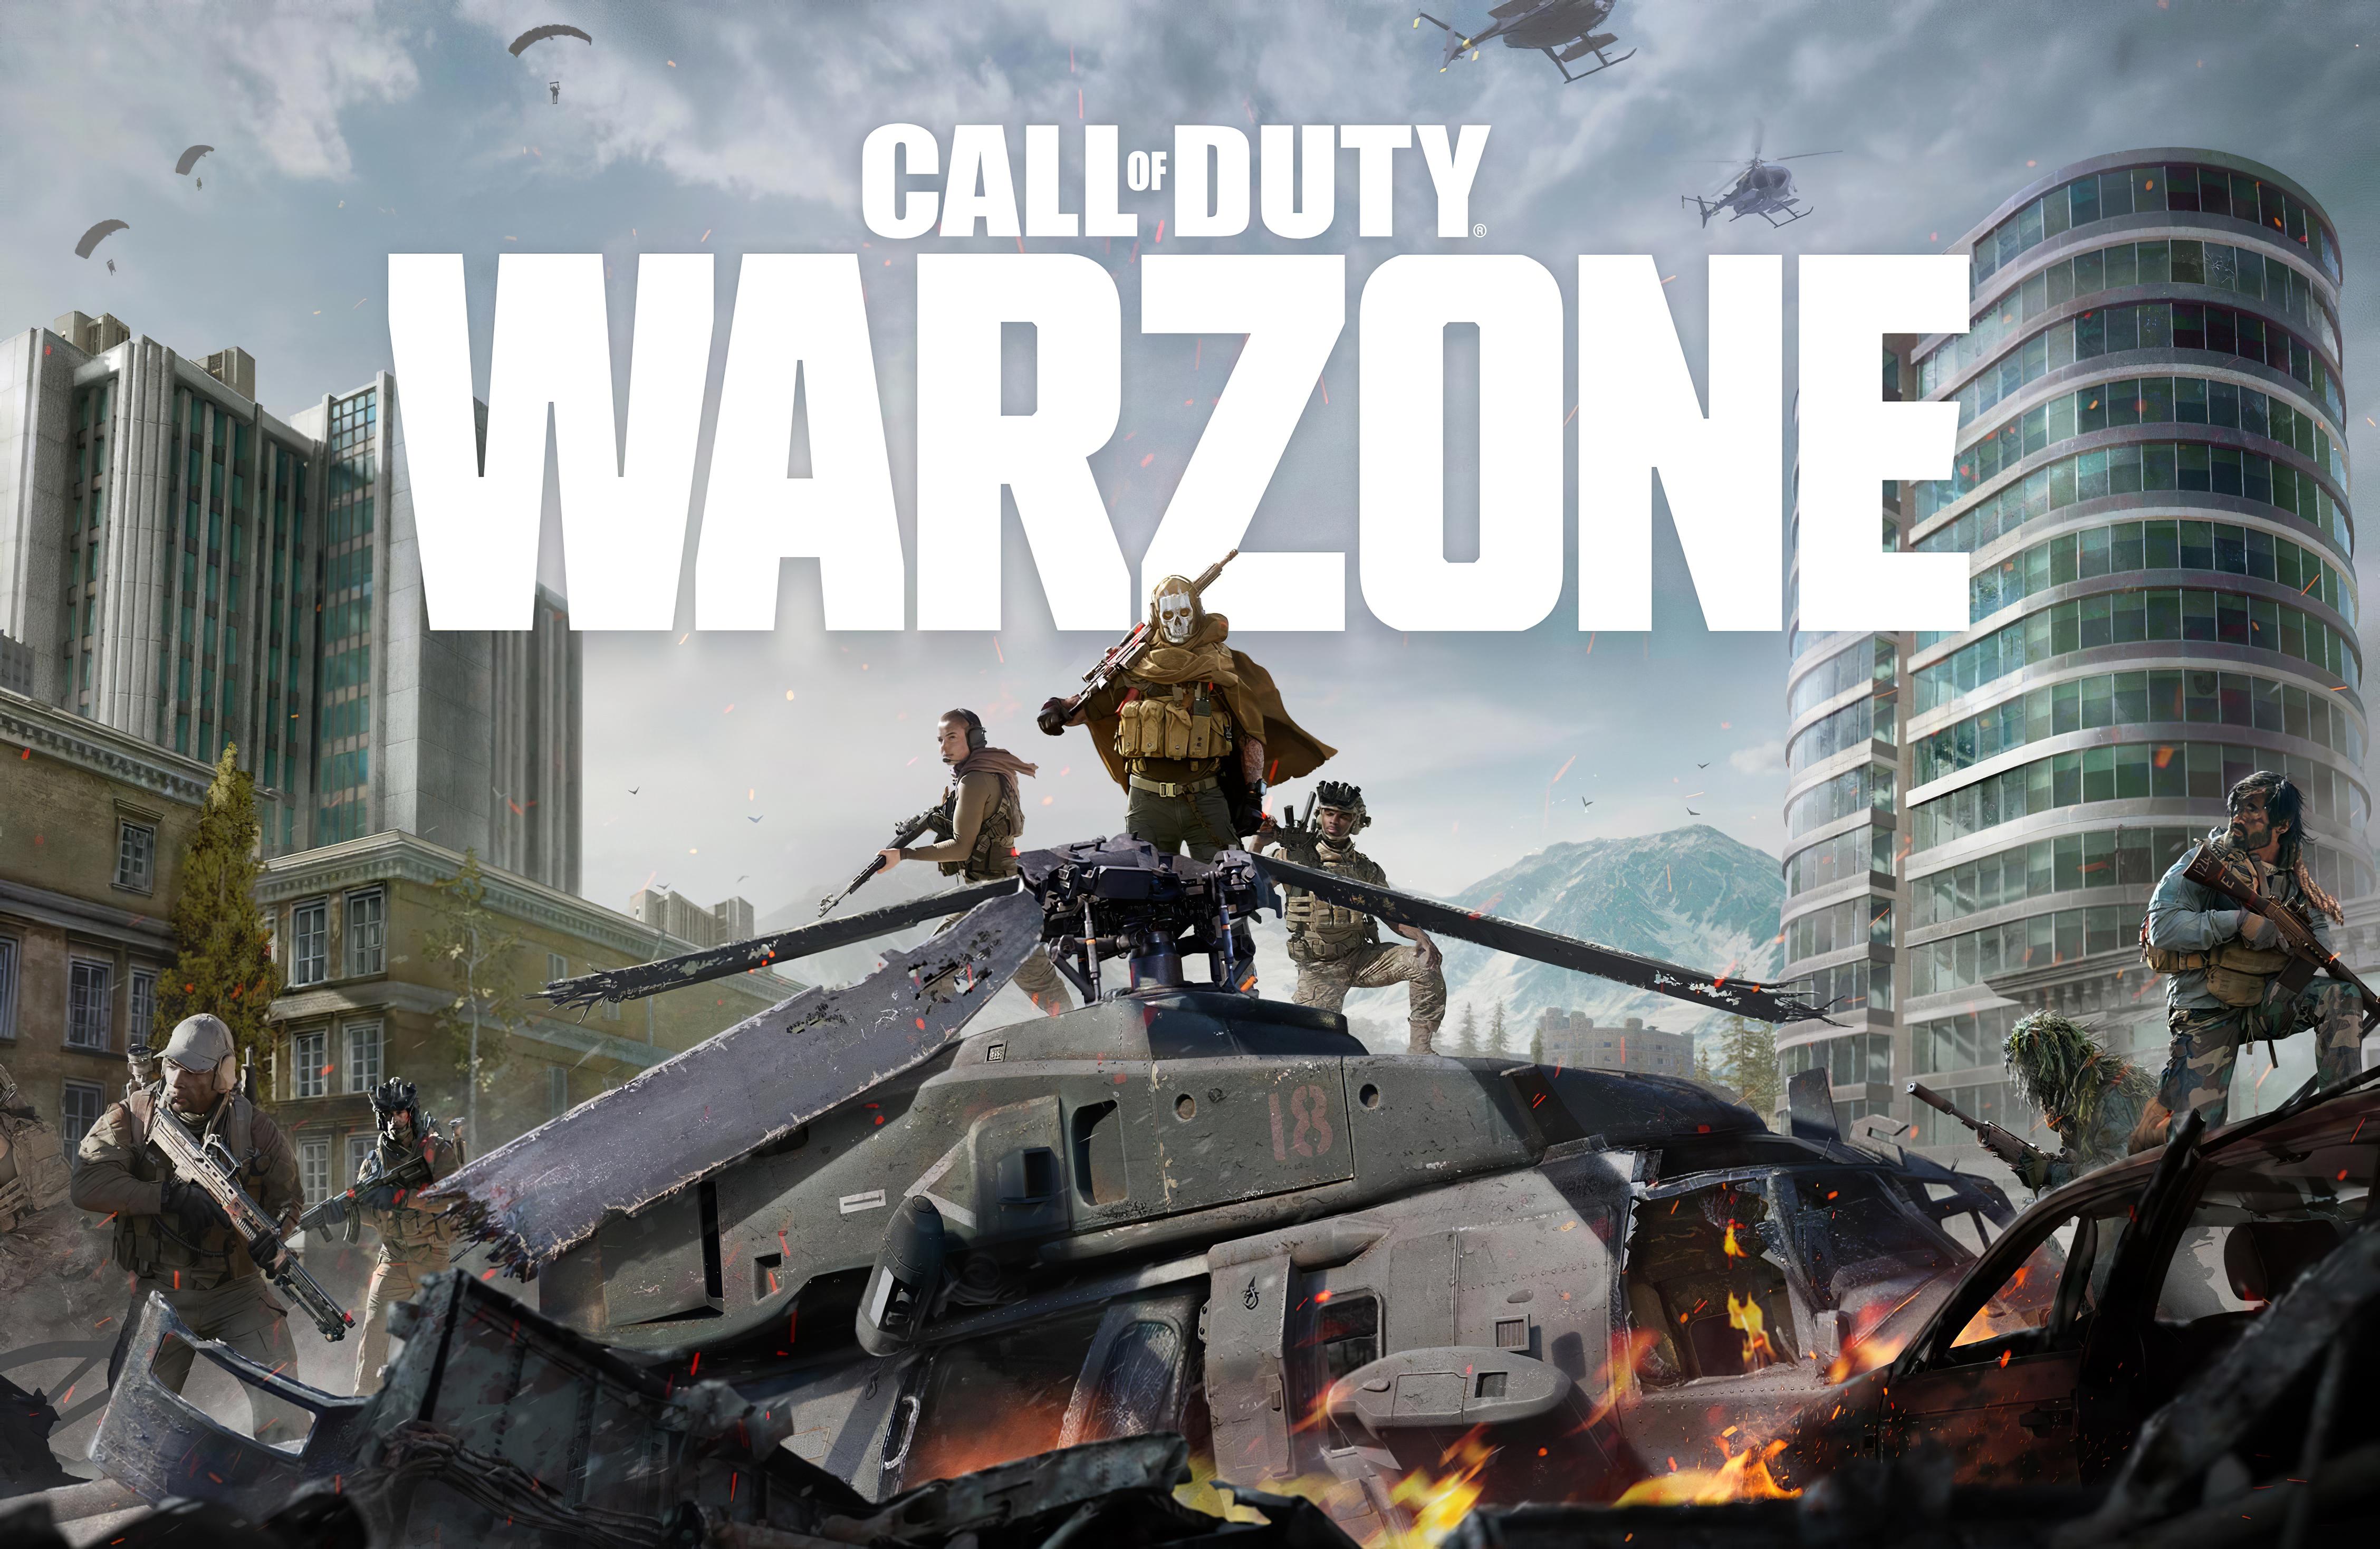 Video Game Call of Duty: Warzone HD Wallpaper Background Image.